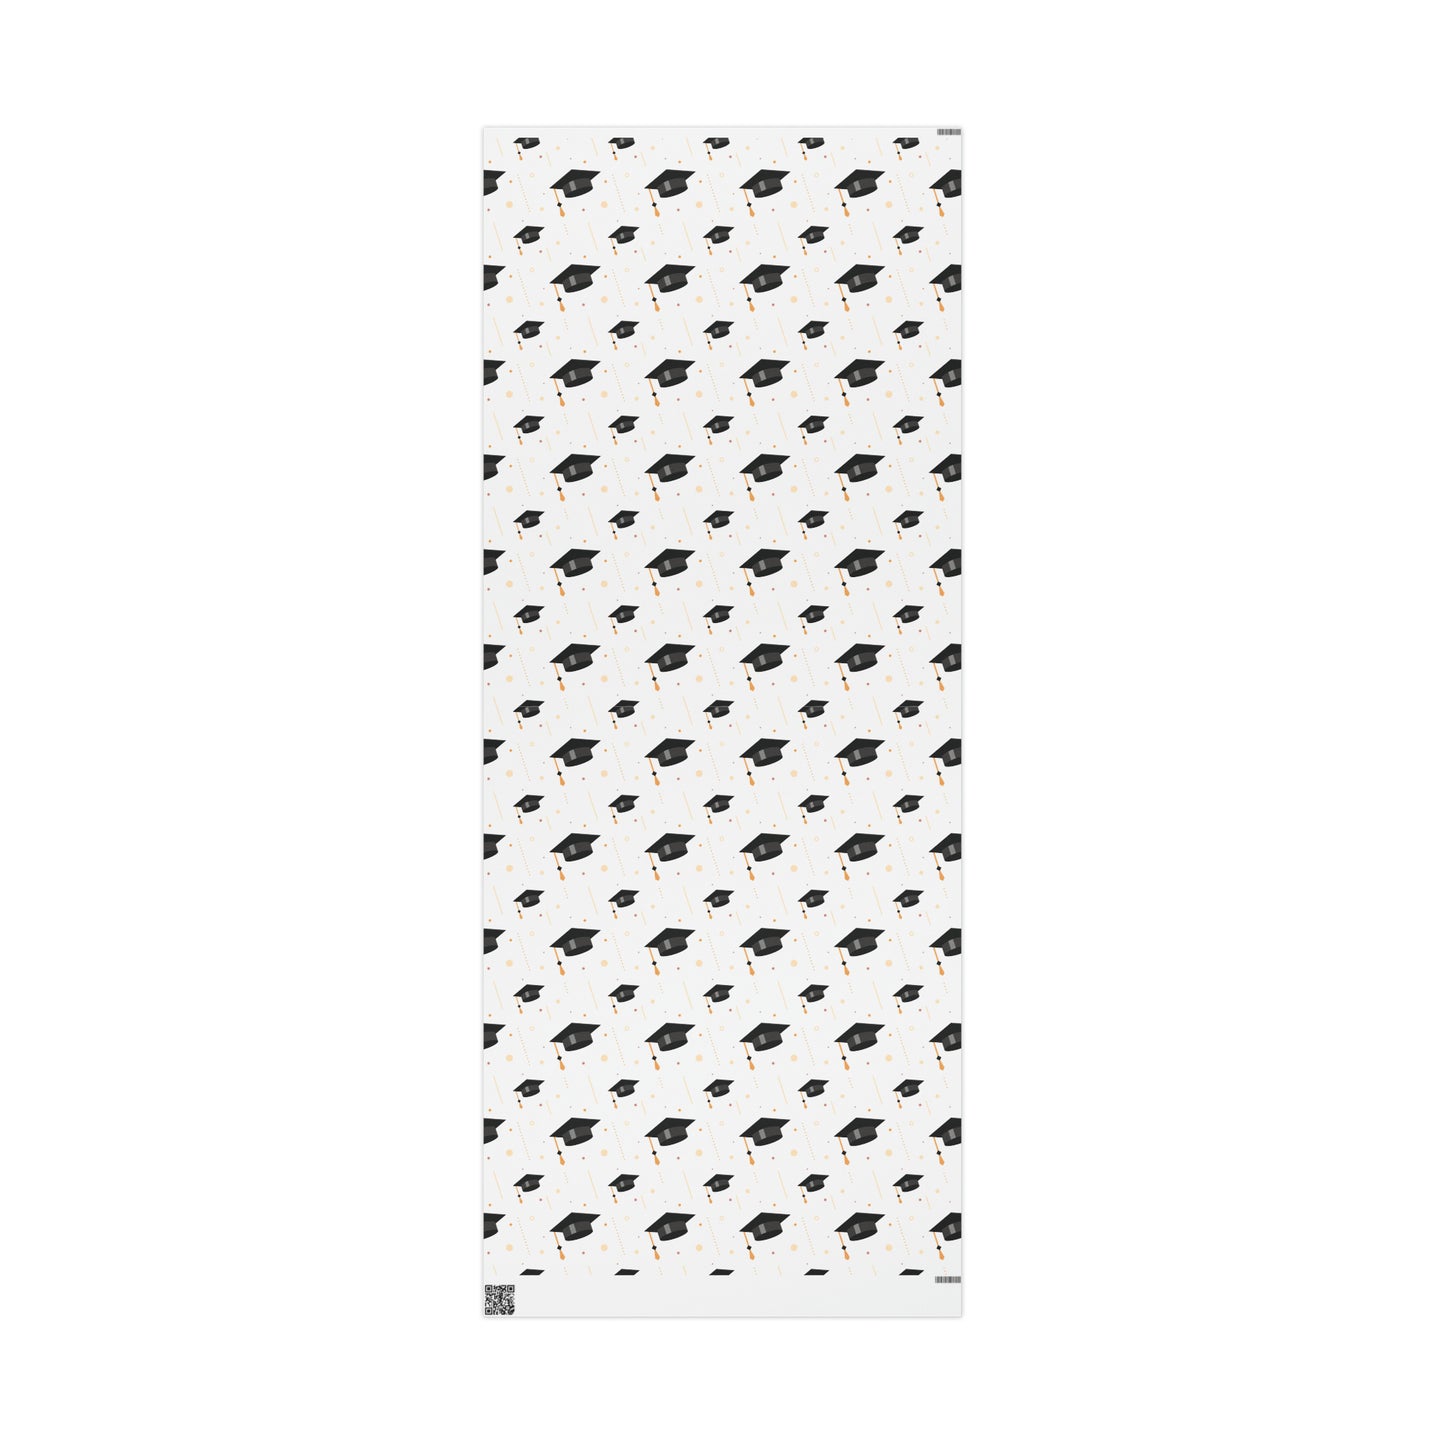 Graduation Gift Wrapping Paper for Gift - Graduate Gift - Congratulations Graduates